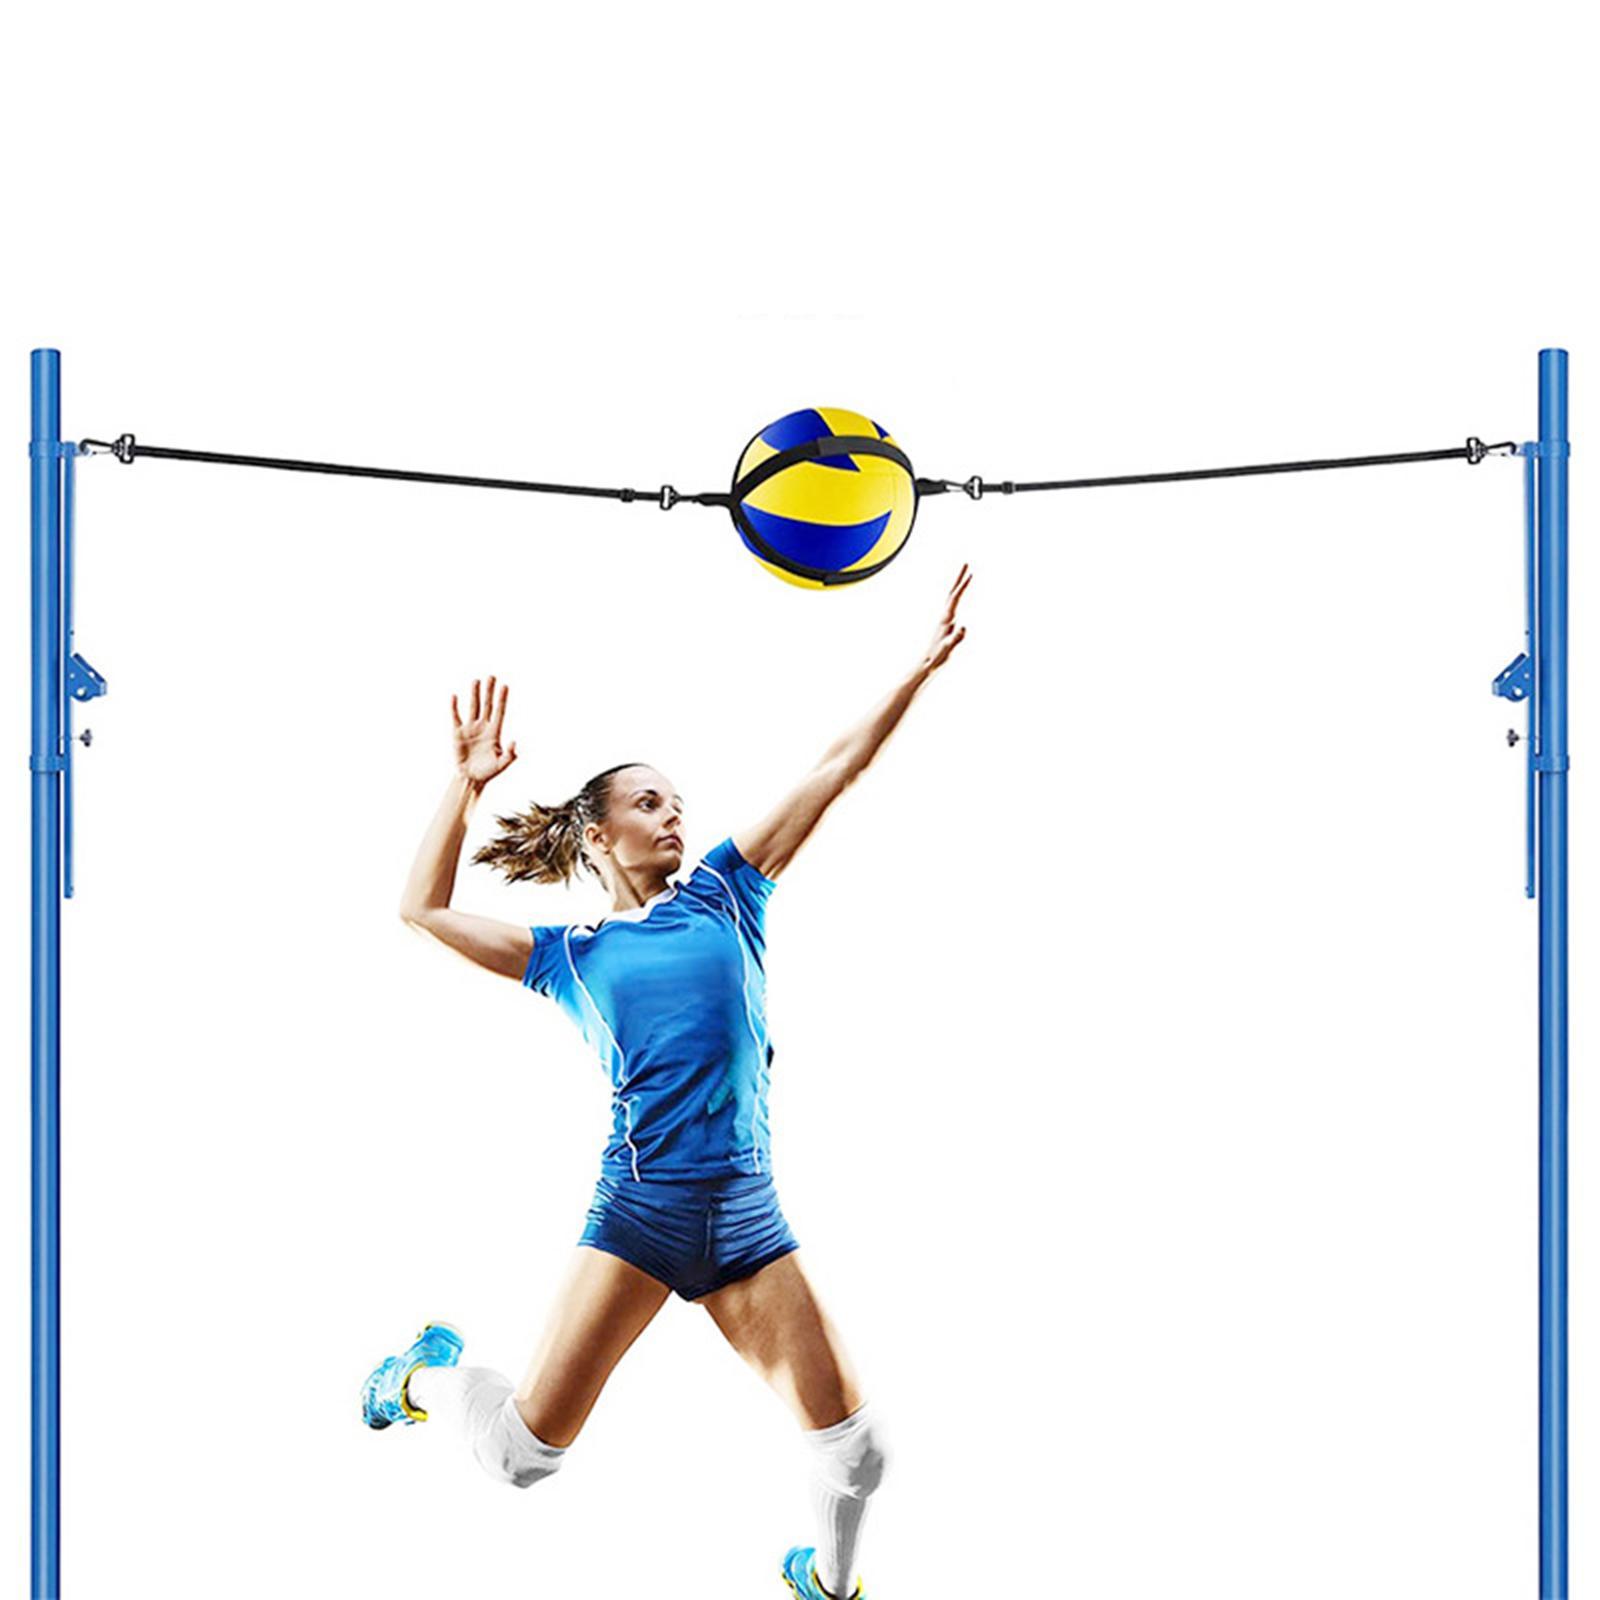 Volleyball Training Equipment Adjustable Teen Girls Boys for Beginners Playing Improves Serving